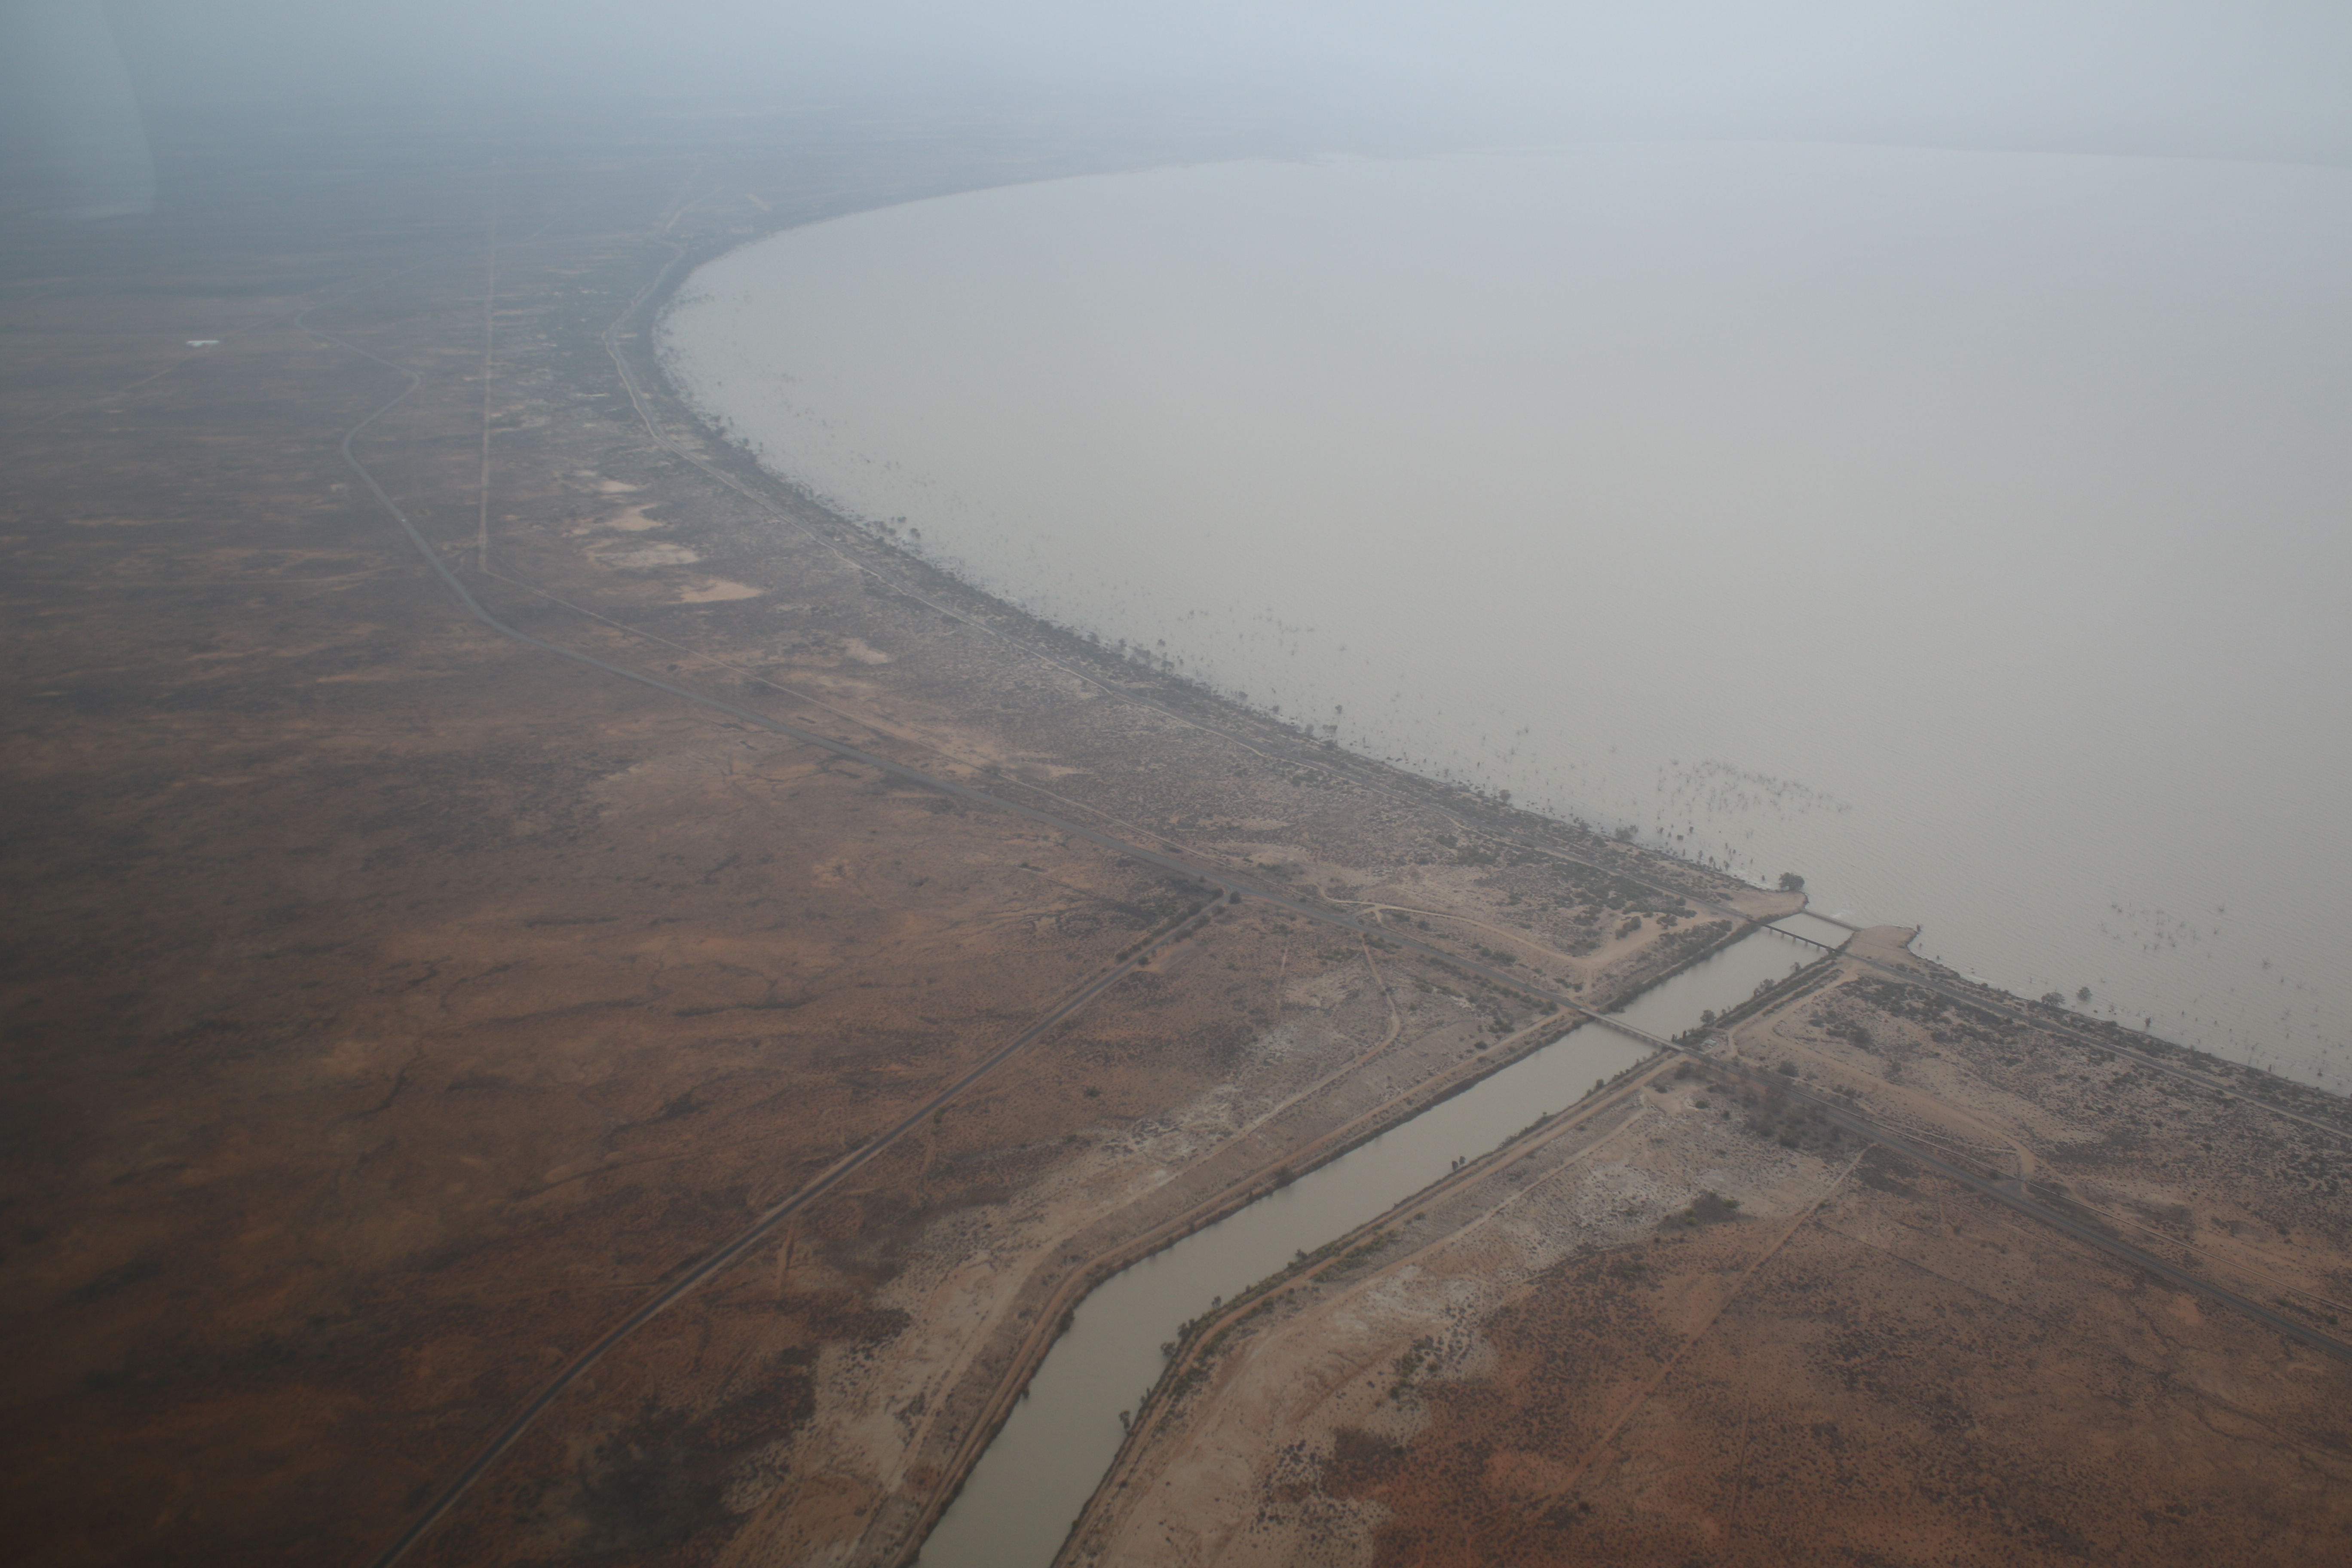 The channel between Copi Hollow and Lake Menindee where we would start in the morning